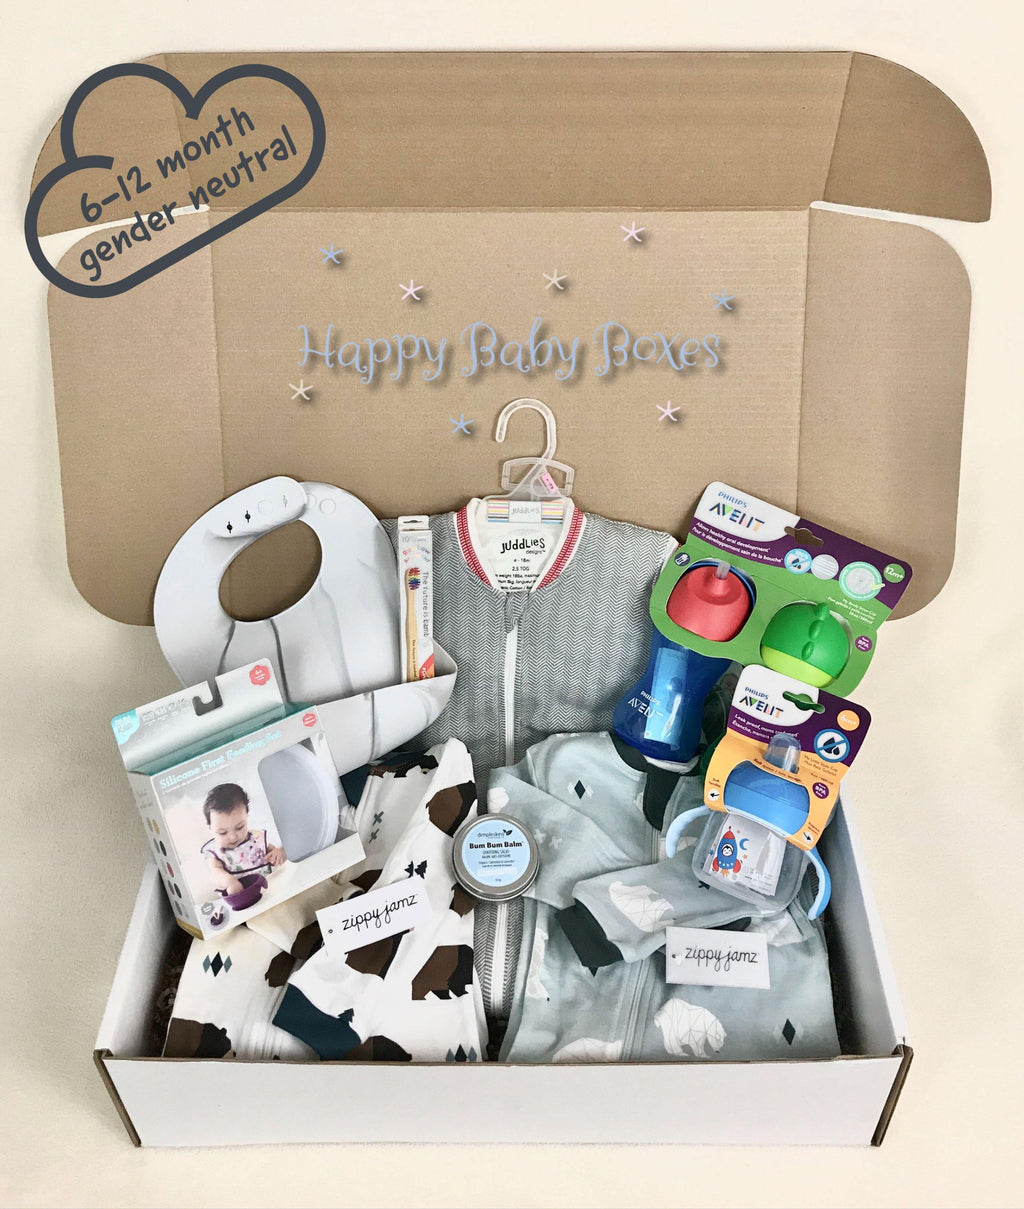 Ultimate 6-12 Month Baby Box - Happy Baby Boxes